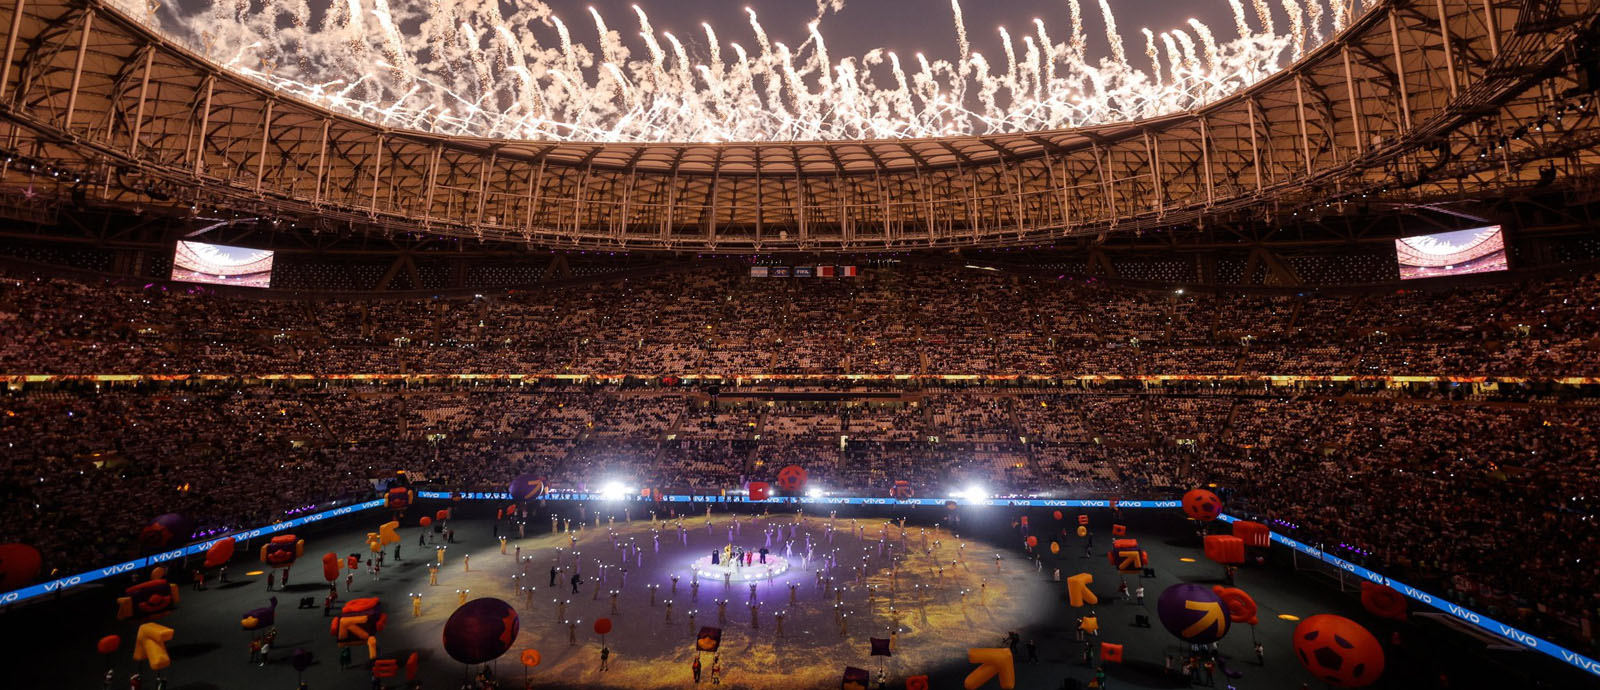 World Cup Closing Ceremony